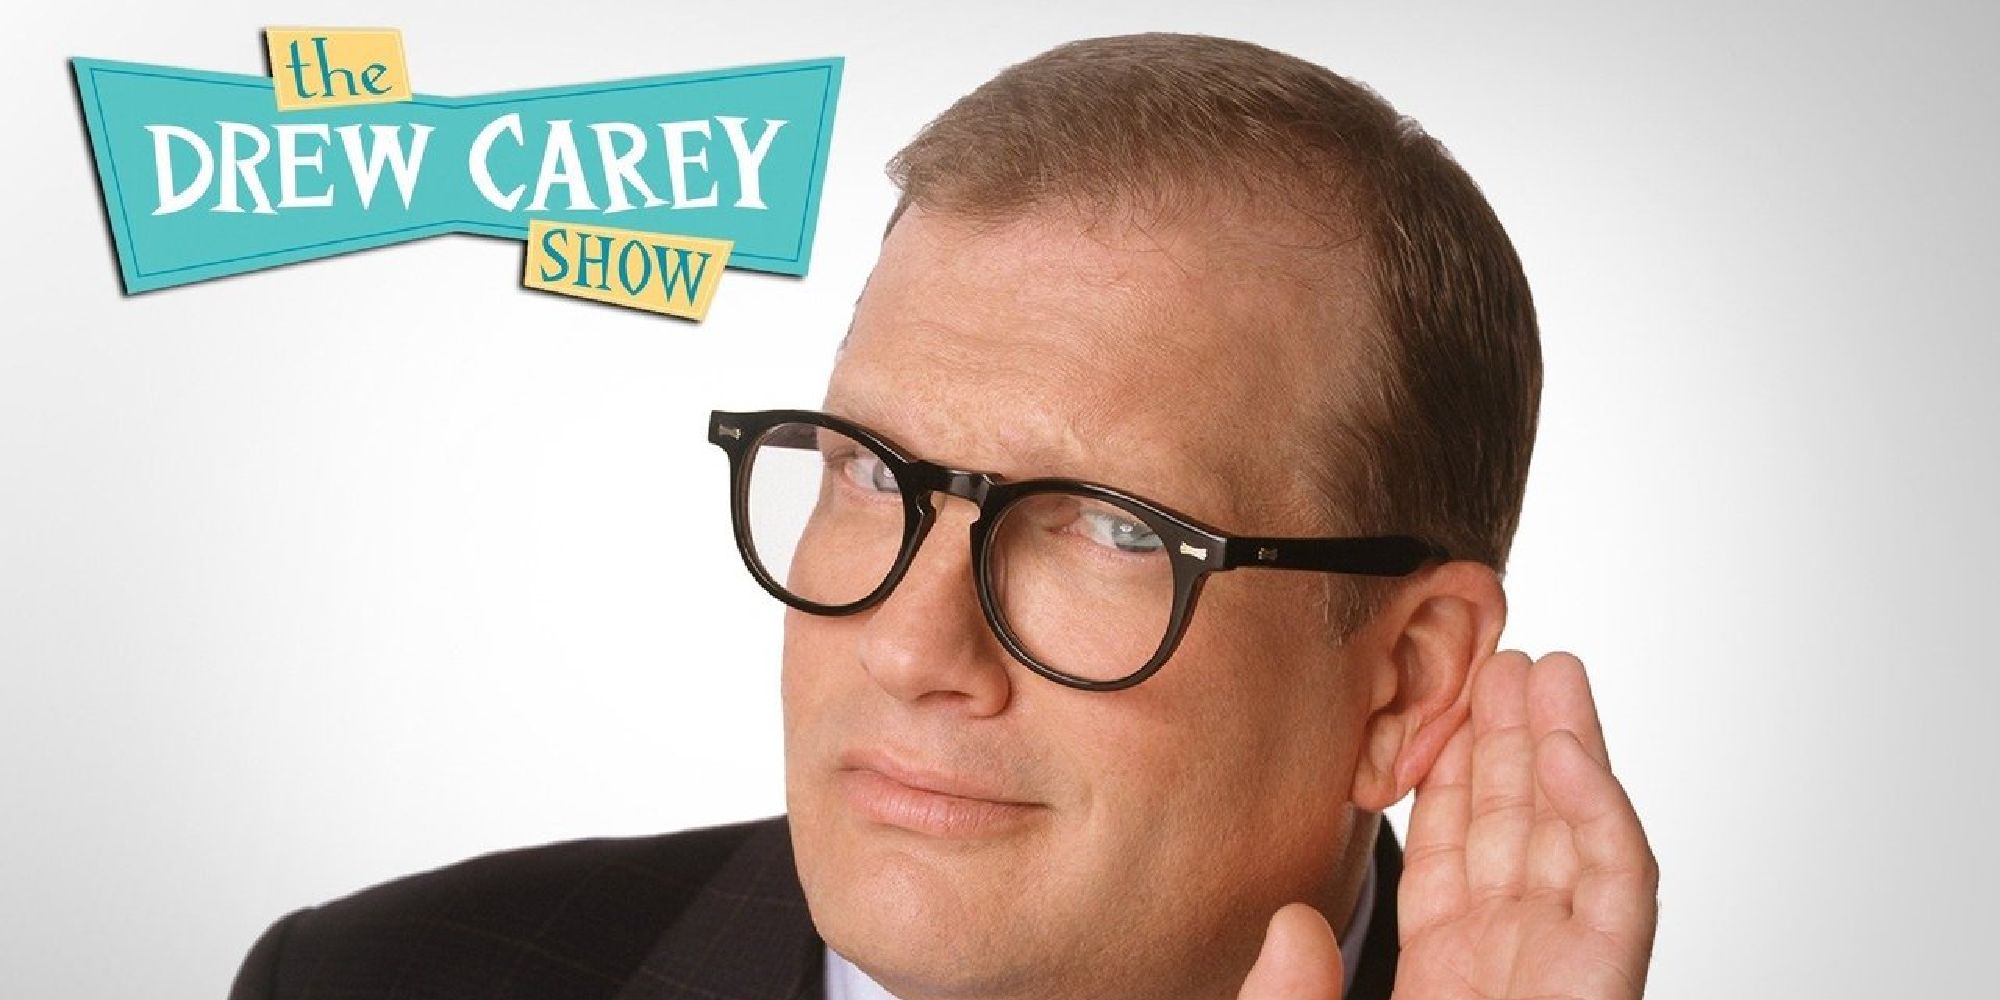 Drew Carey in a promotional shoot for The Drew Carey Show